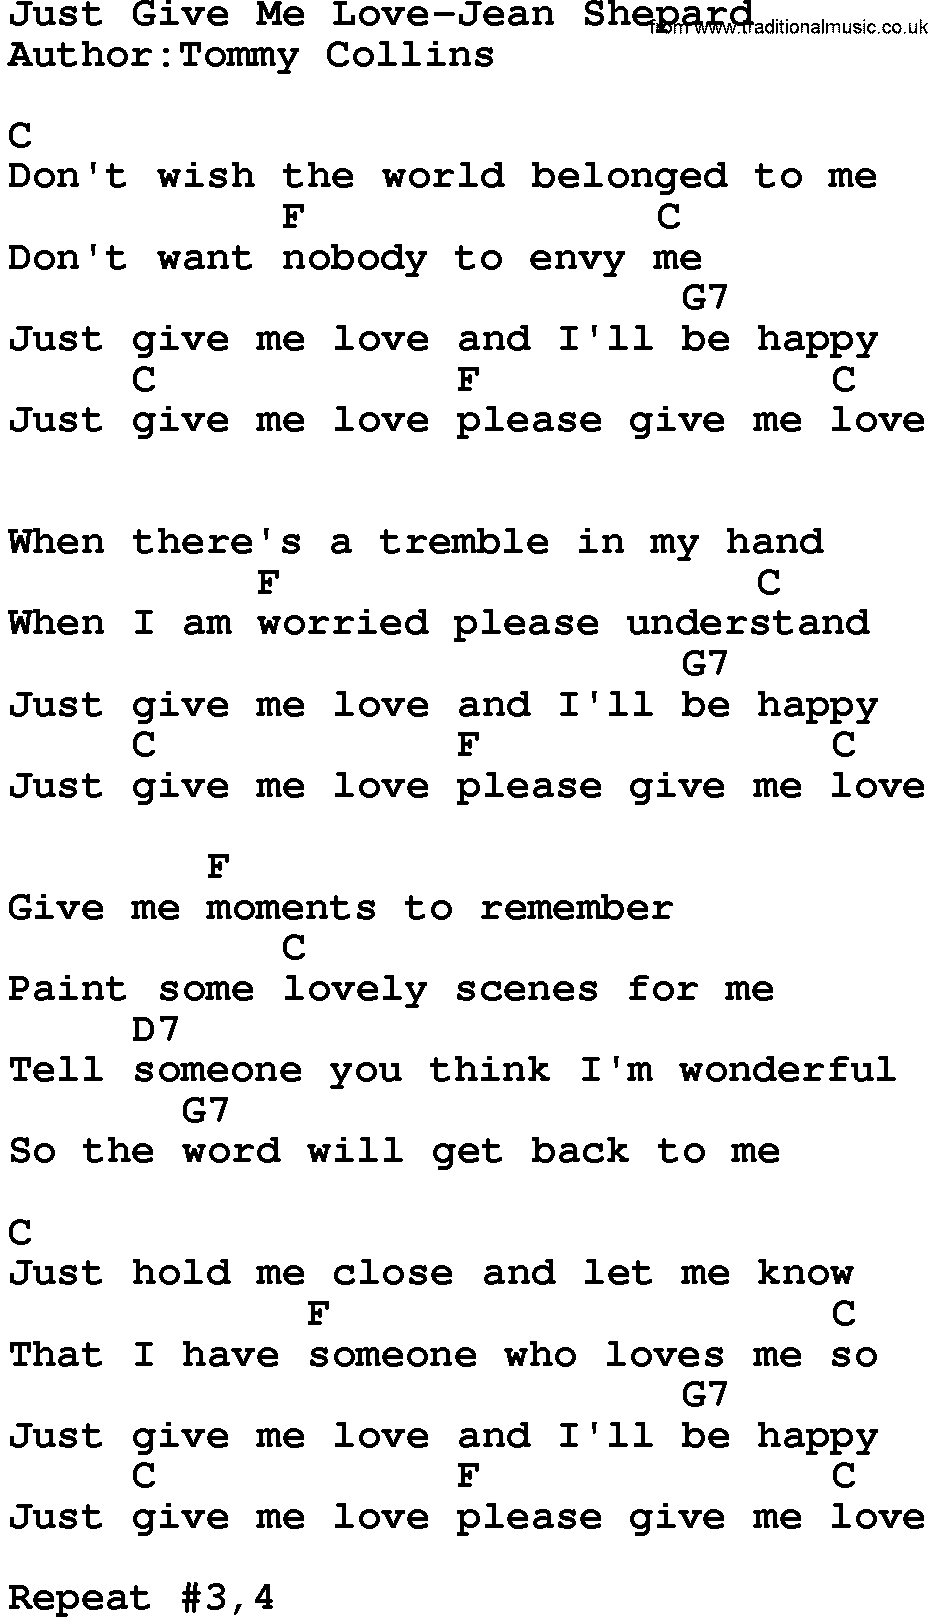 Country music song: Just Give Me Love-Jean Shepard lyrics and chords